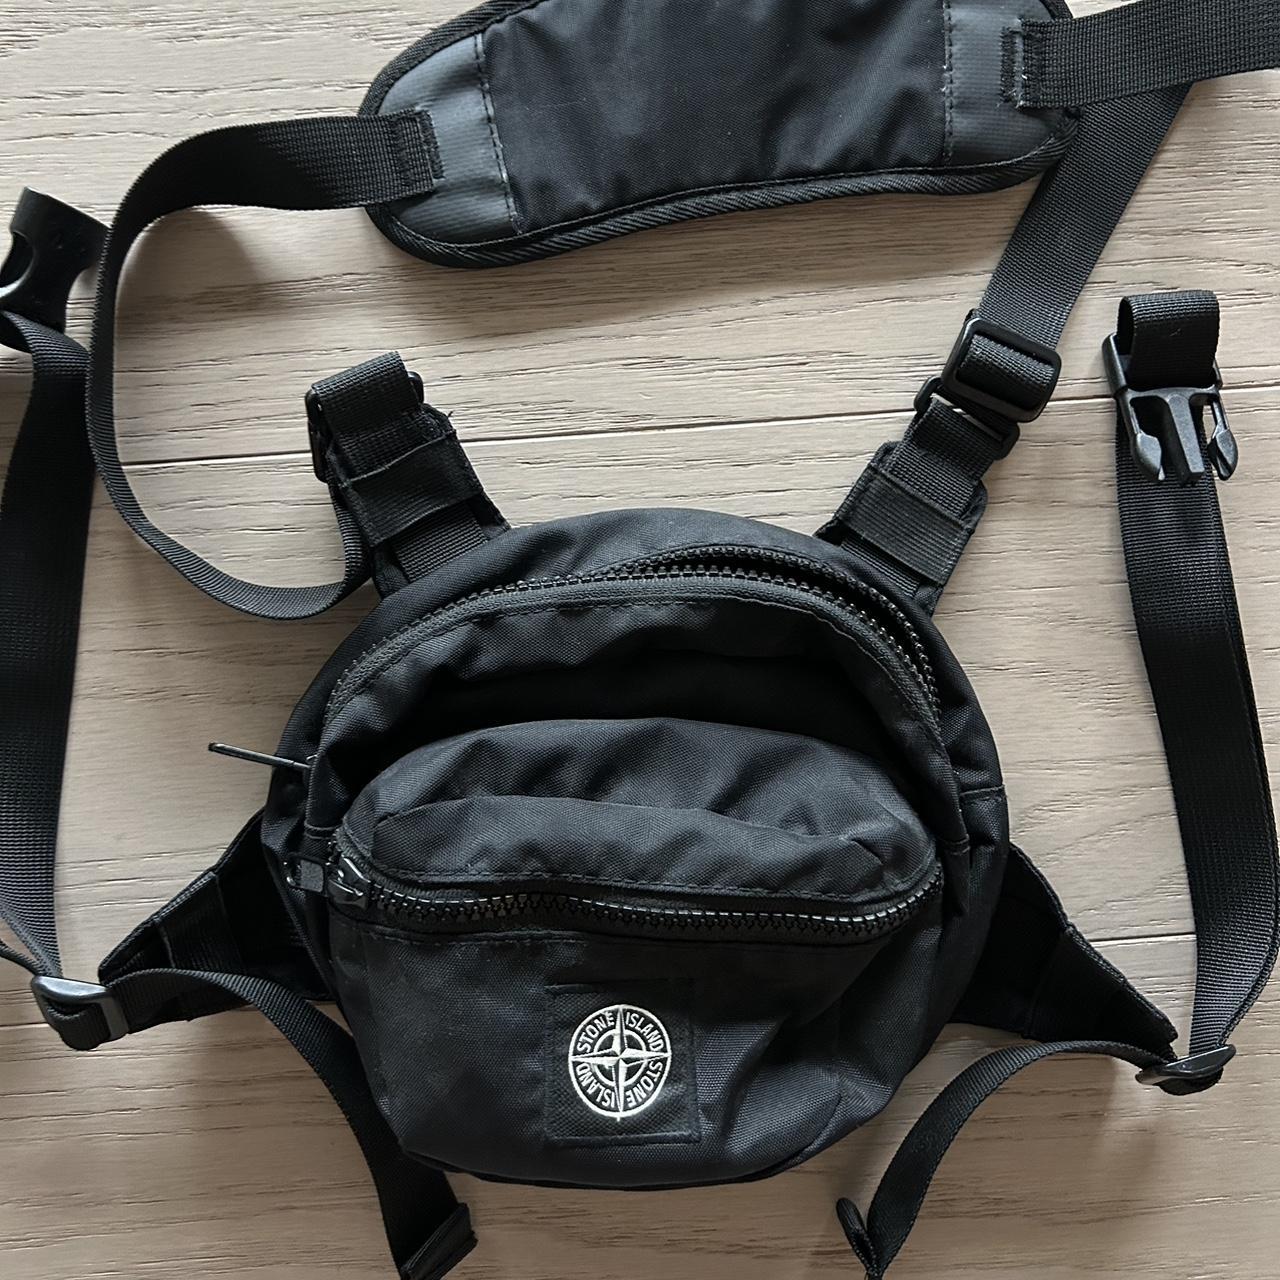 Stone Island Harness Bag Purchased in Russia Worn a... - Depop